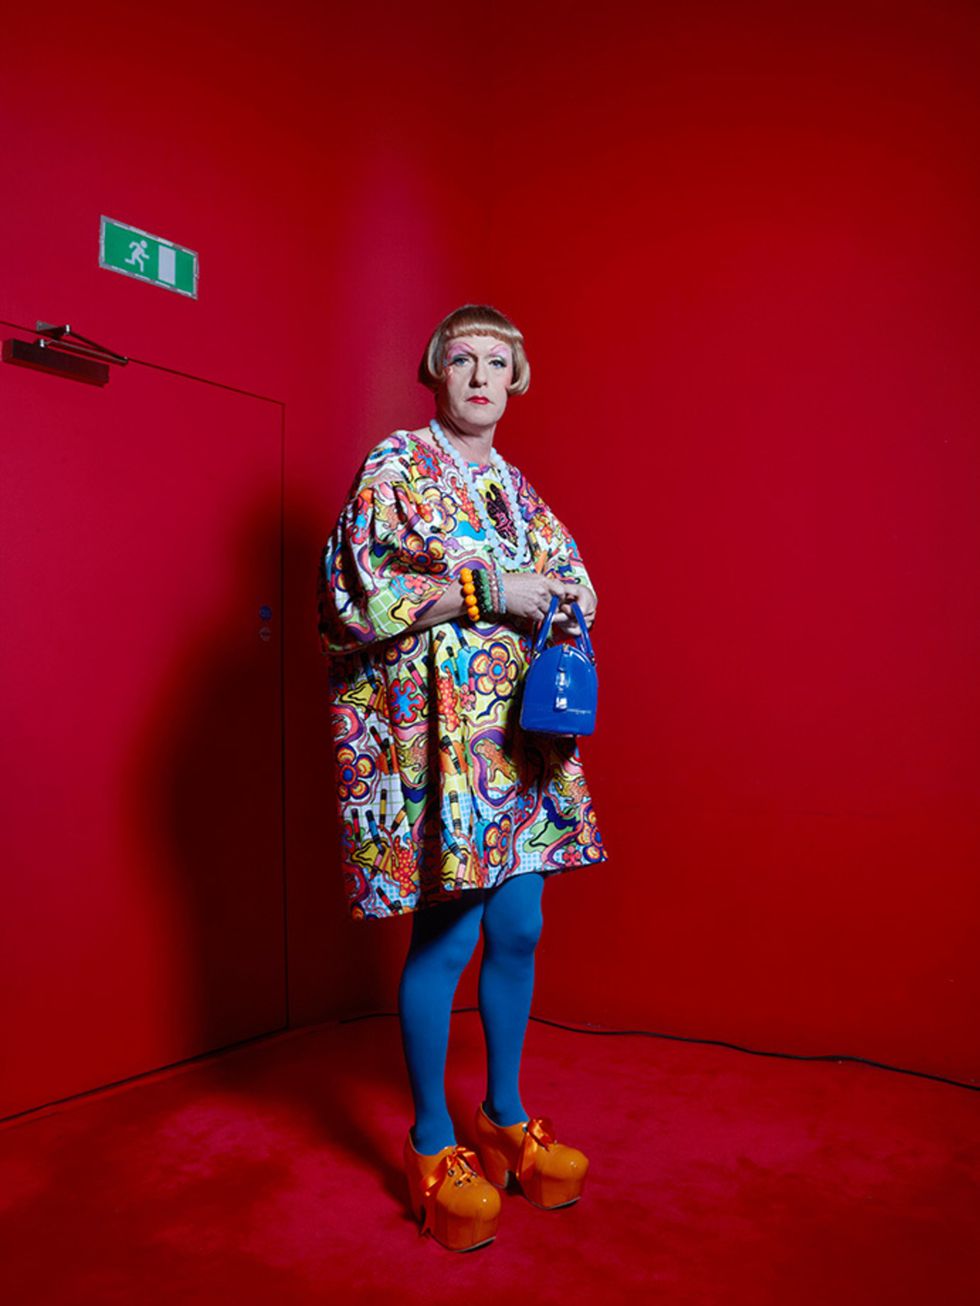 <p><strong>EXHIBITION: Grayson Perry &ndash; Who Are You?</strong></p>

<p>Perhaps better known for his colourful alter ego Claire, Turner-prize winner, national treasure and ceramic maverick Grayson Perry asks <em>Who Are You?</em> in his latest exhibiti